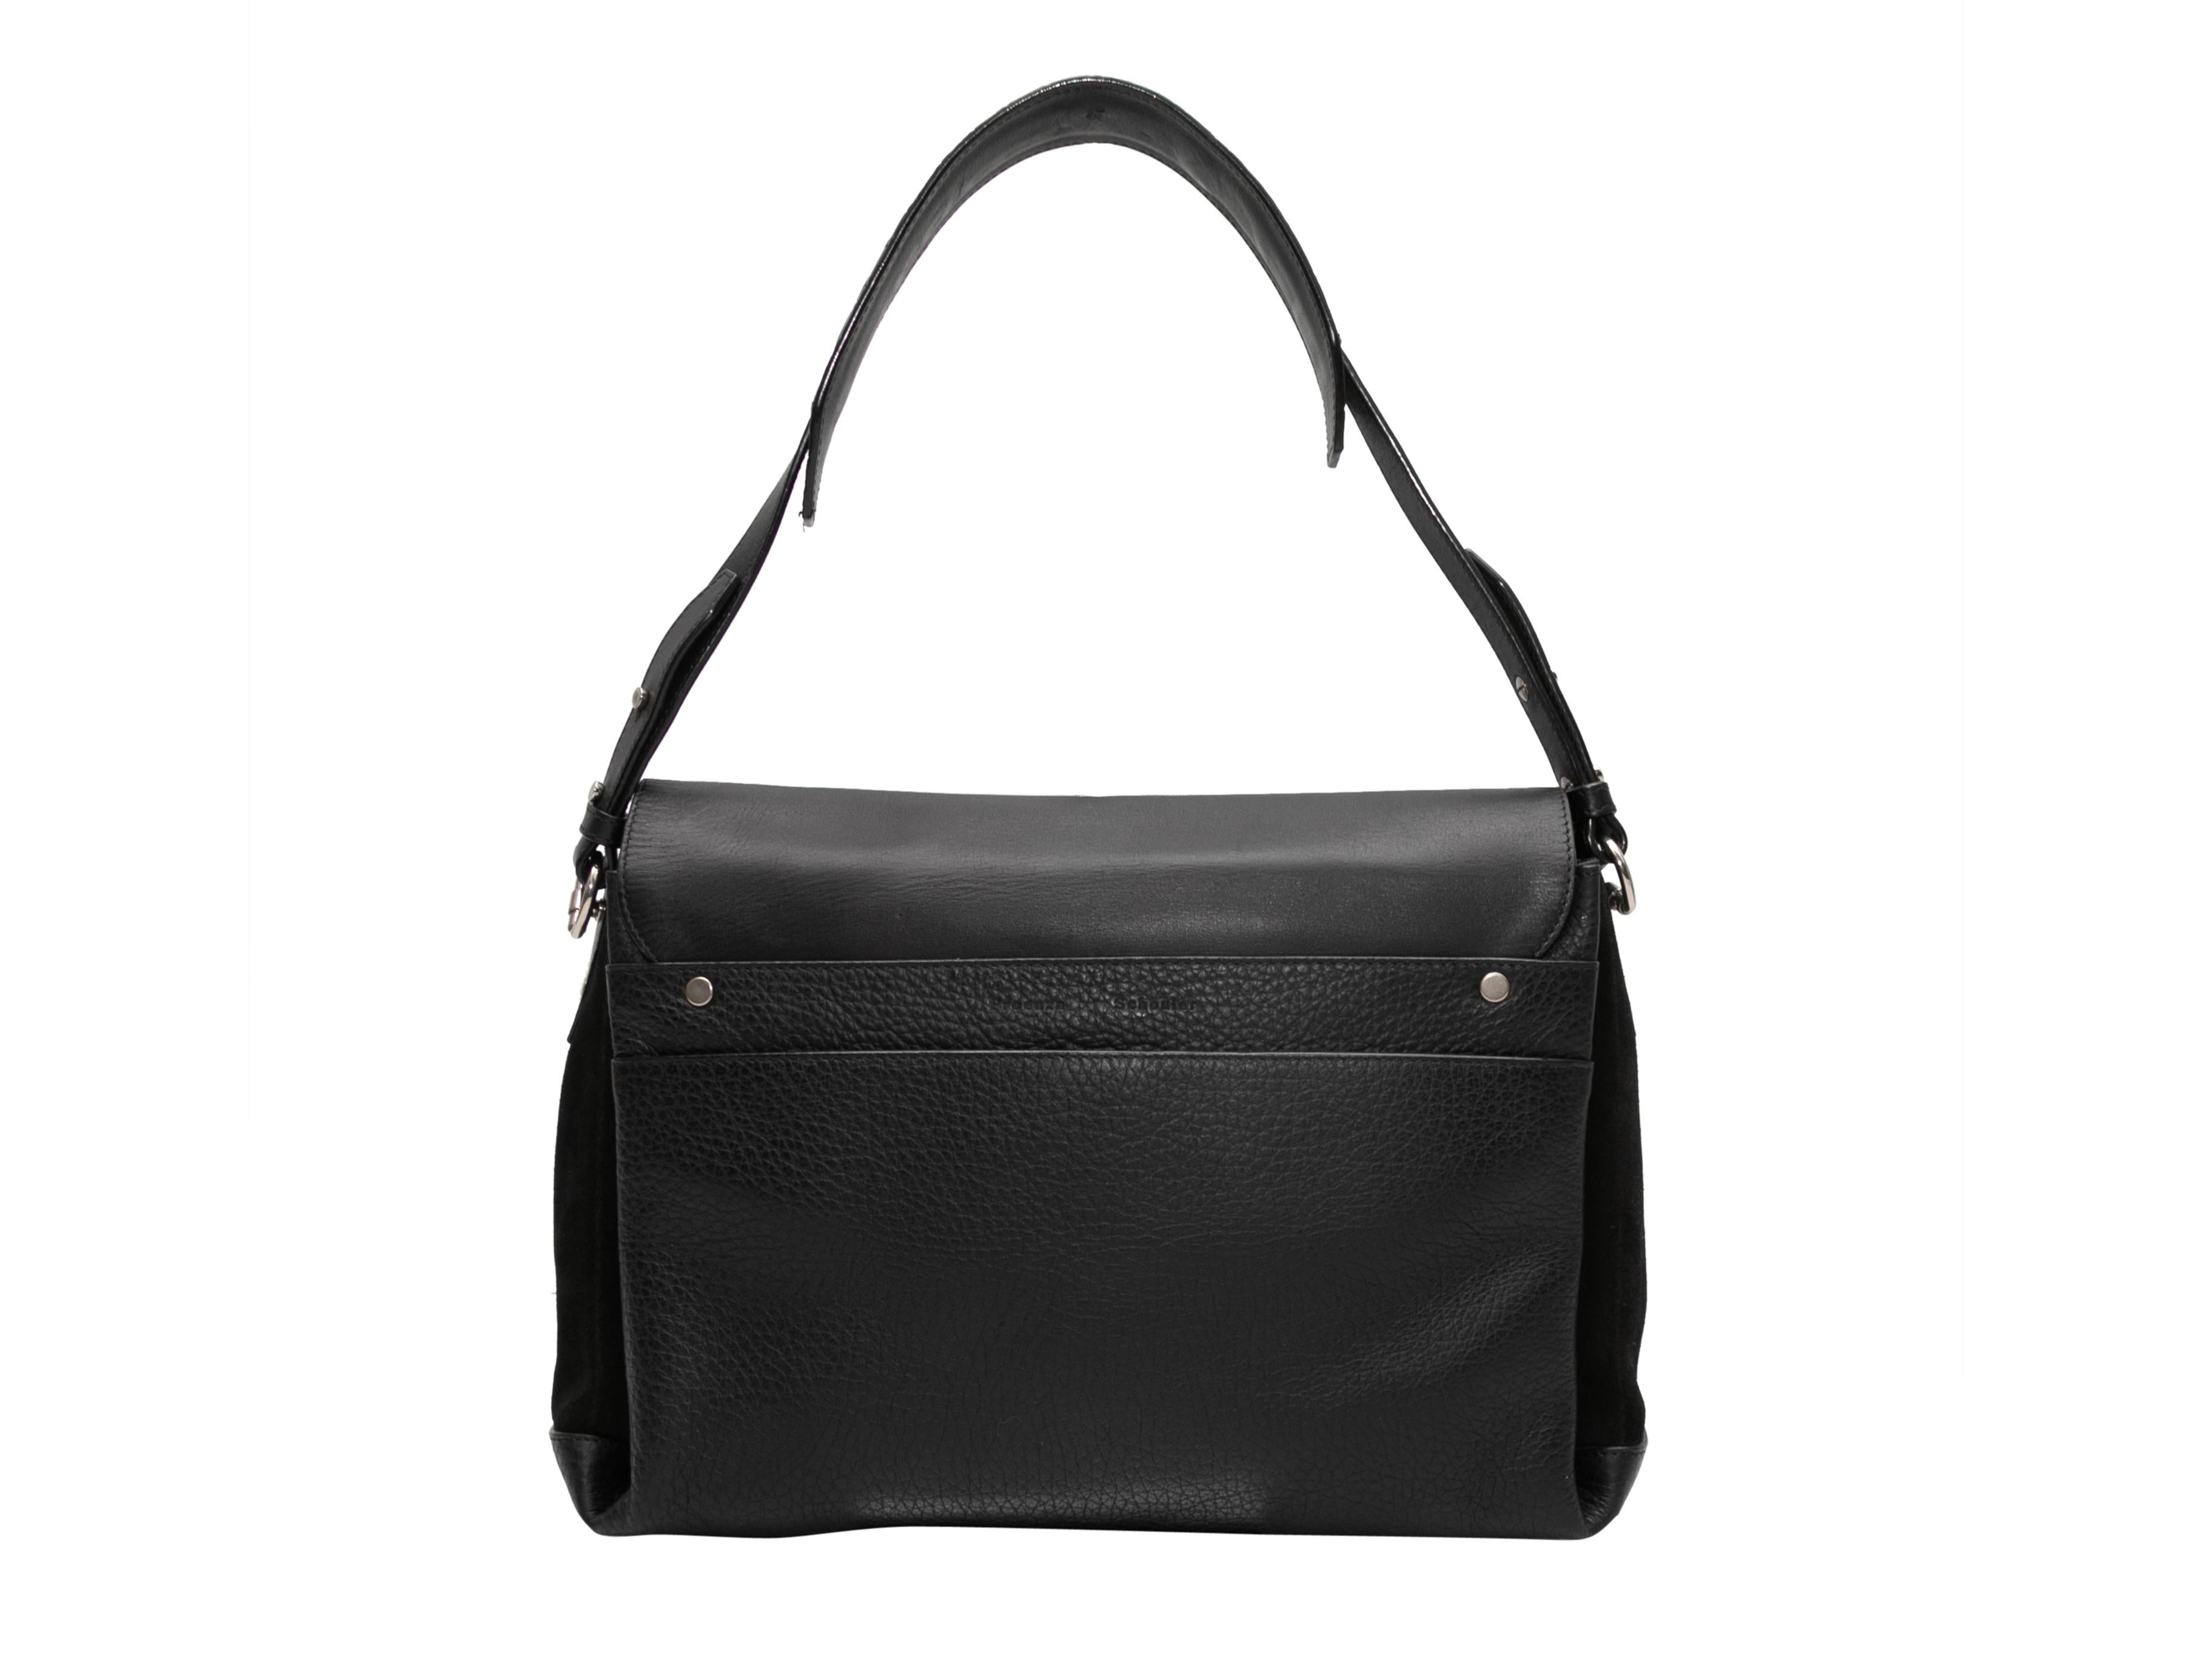 Black Proenza Schouler Leather Shoulder Bag. This shoulder bag features a leather body, silver-tone hardware, a single flat shoulder strap, and a front turn-lock flap closure. 13